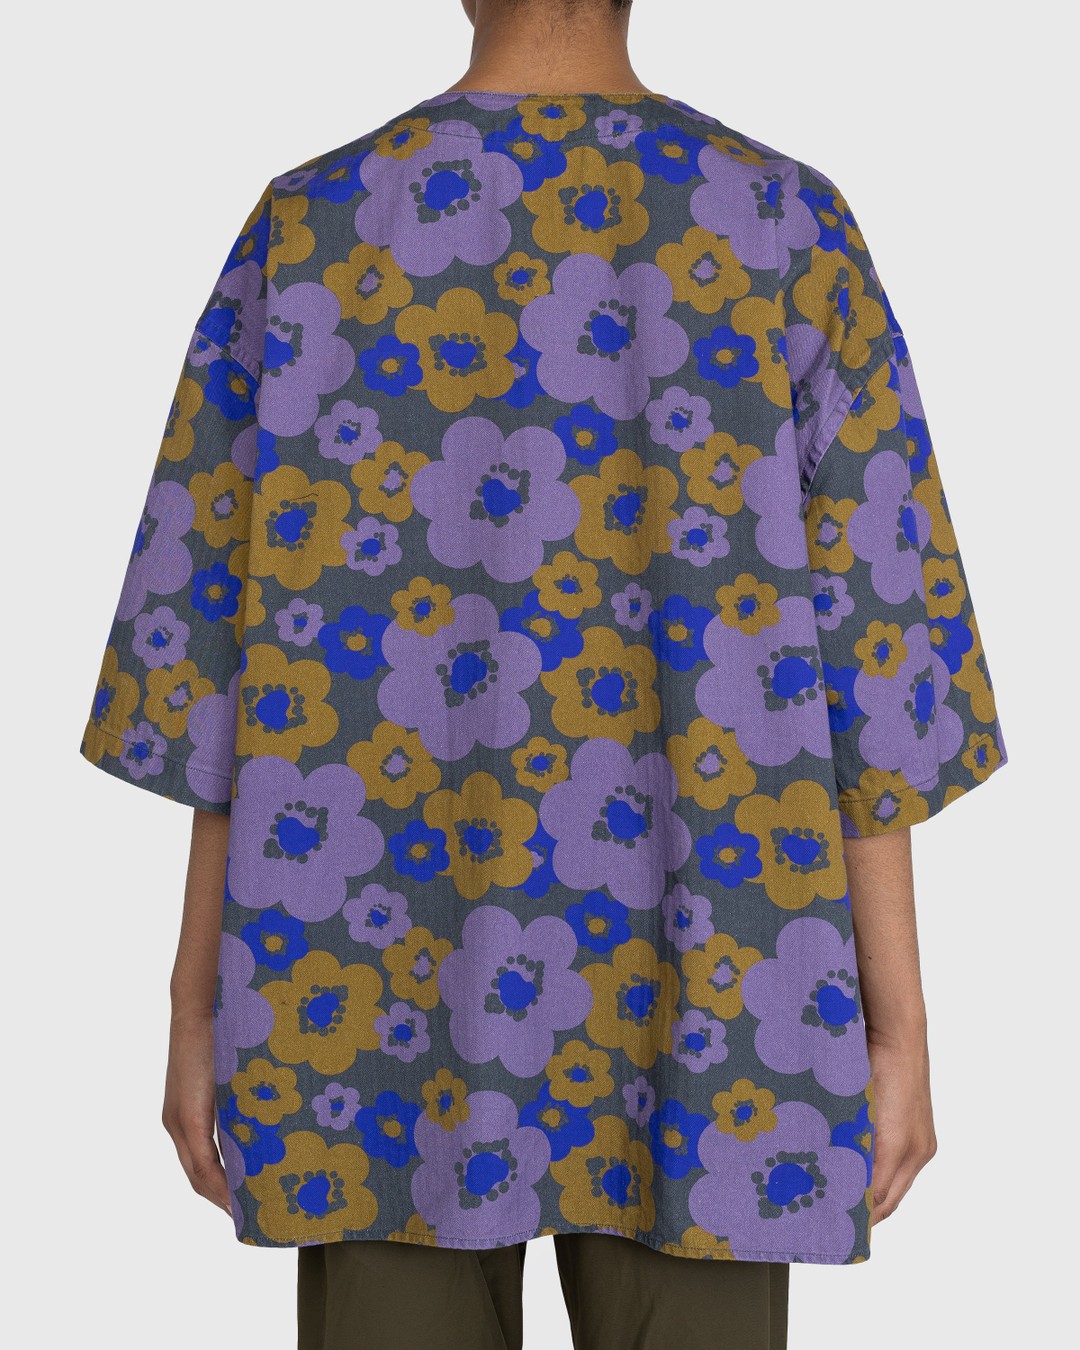 Acne Studios – Floral Short-Sleeve Button-Up Purple/Brown - Shortsleeve Shirts - Multi - Image 4